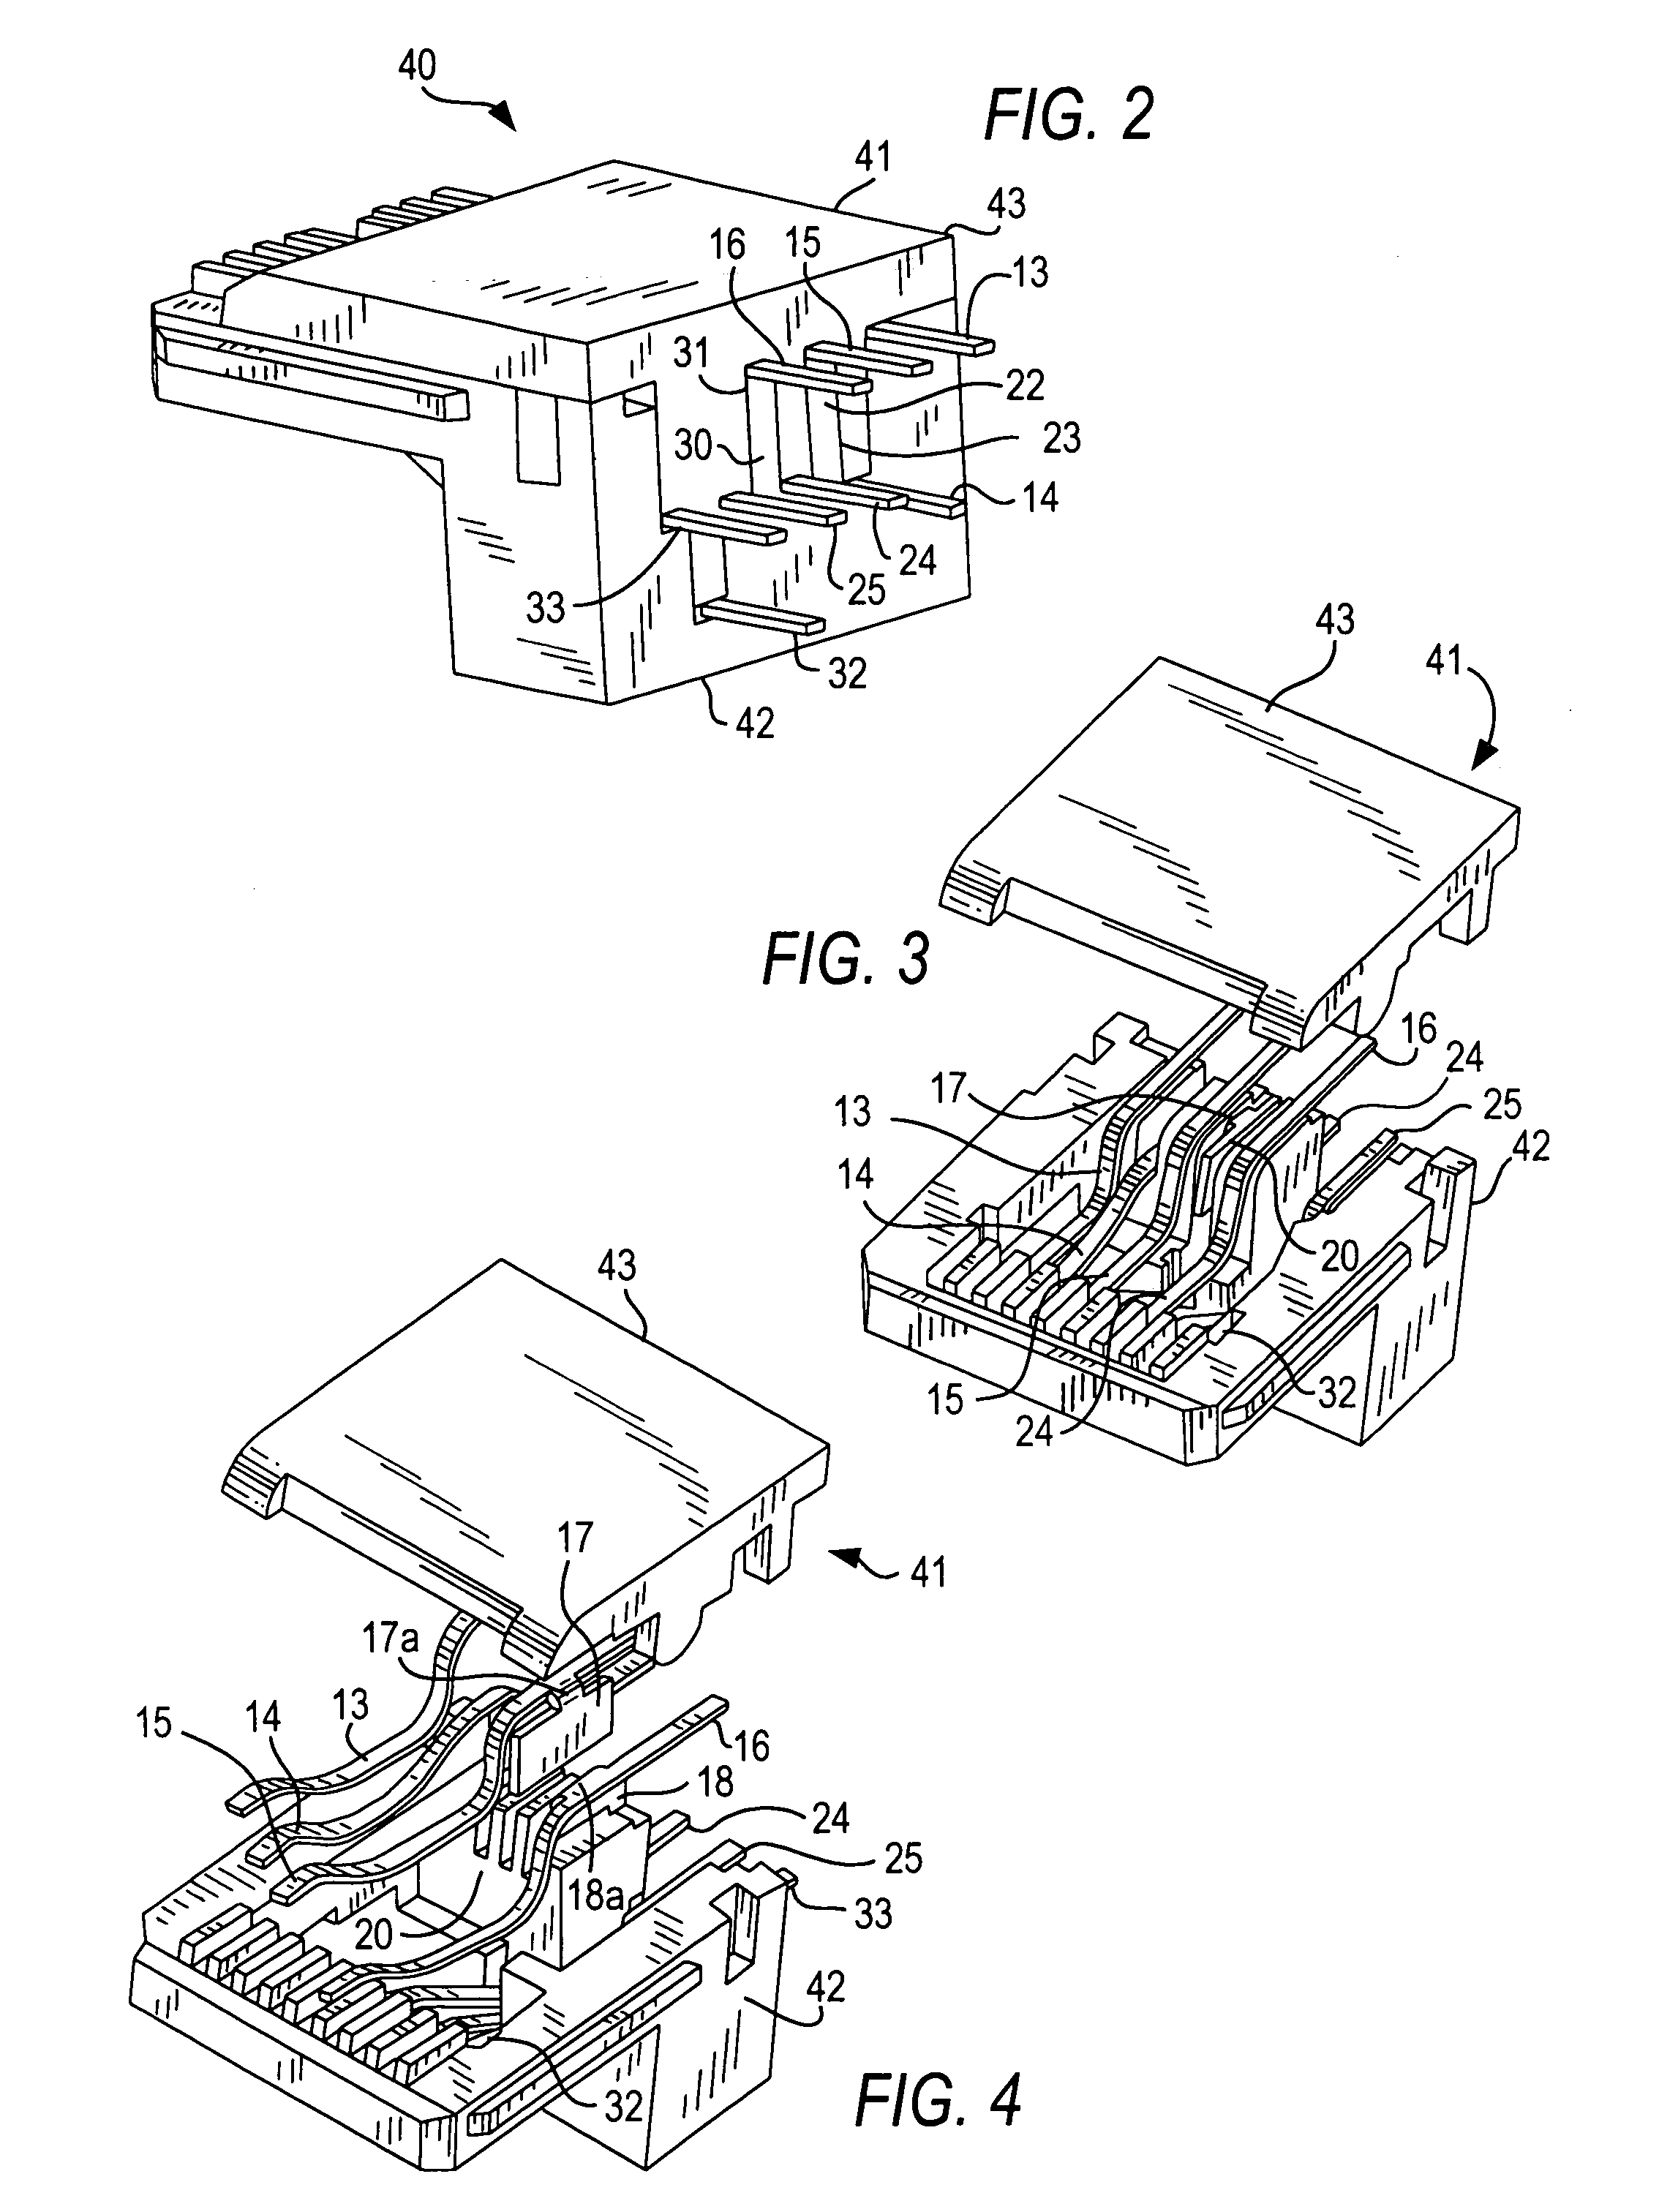 High performance, high capacitance gain, jack connector for data transmission or the like